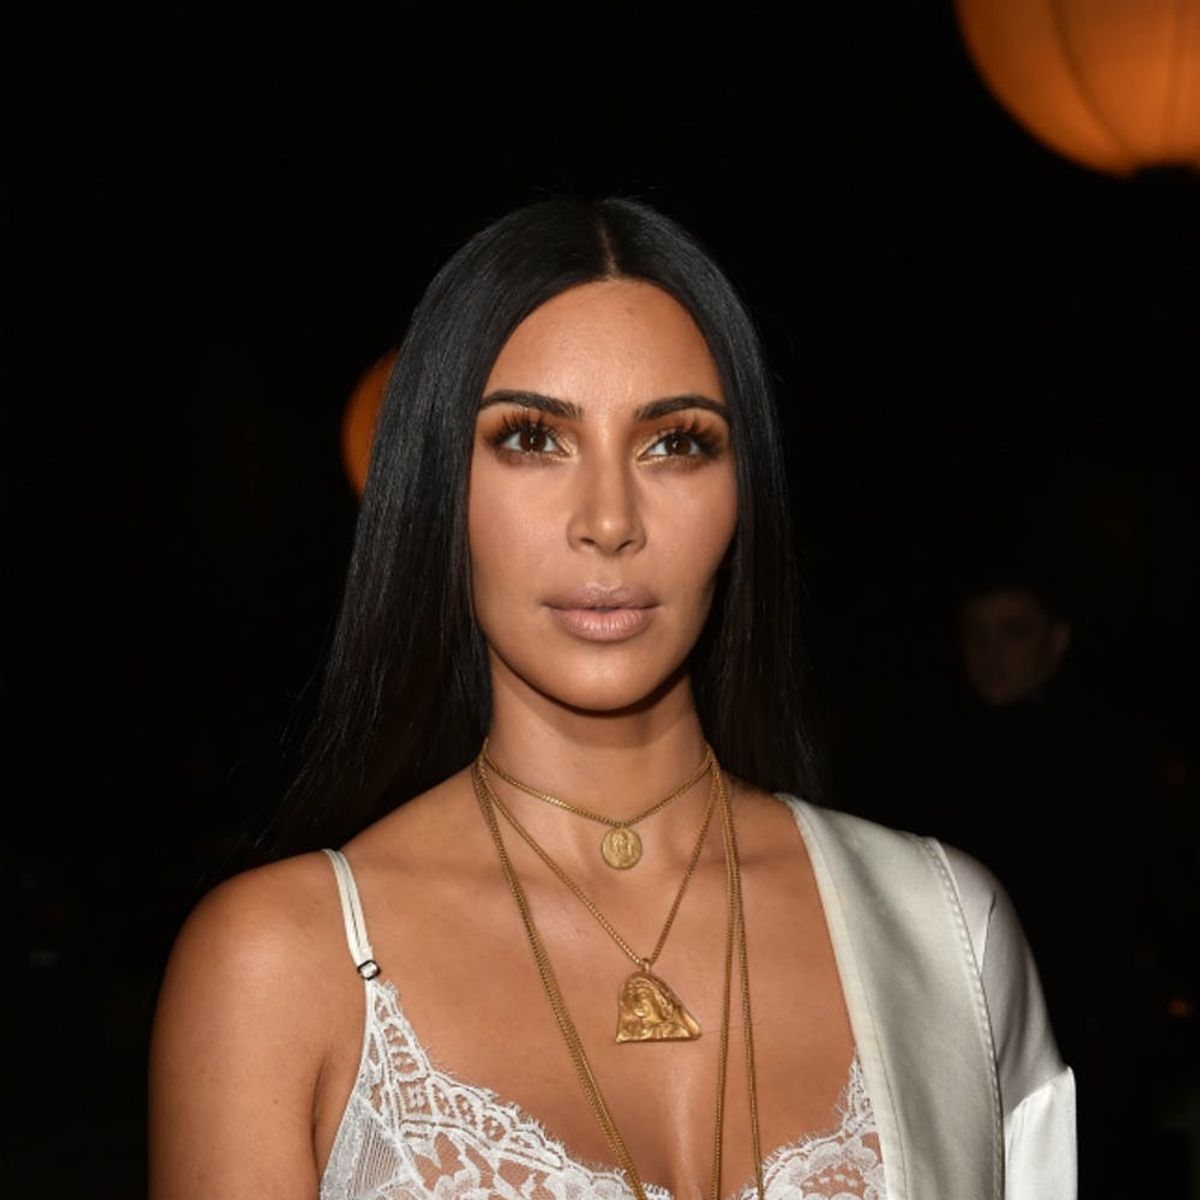 Kim Kardashian Removed “West” from Her Social Media Accounts Today